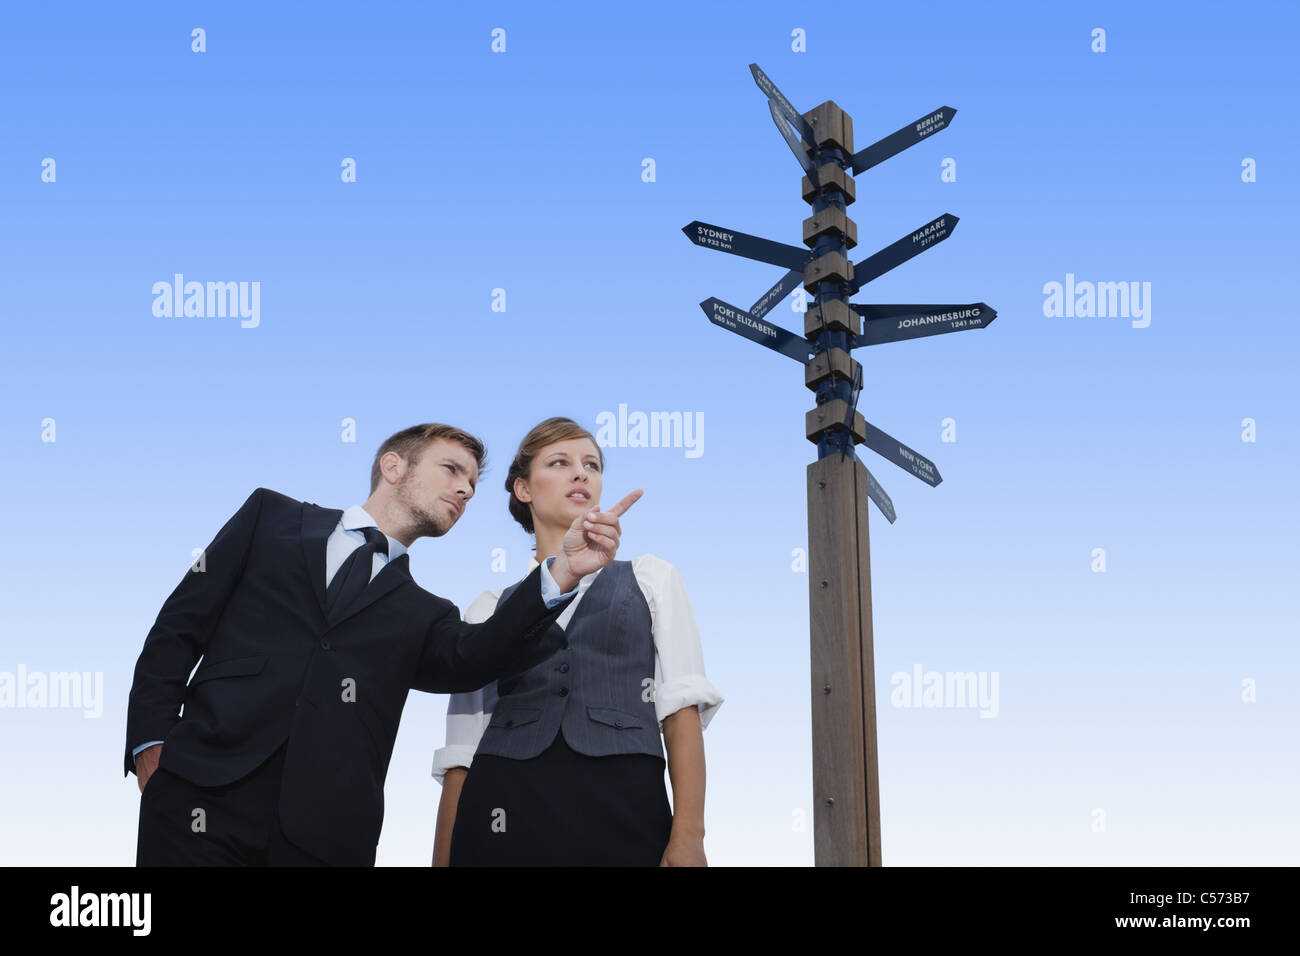 Business people at crossroads Stock Photo